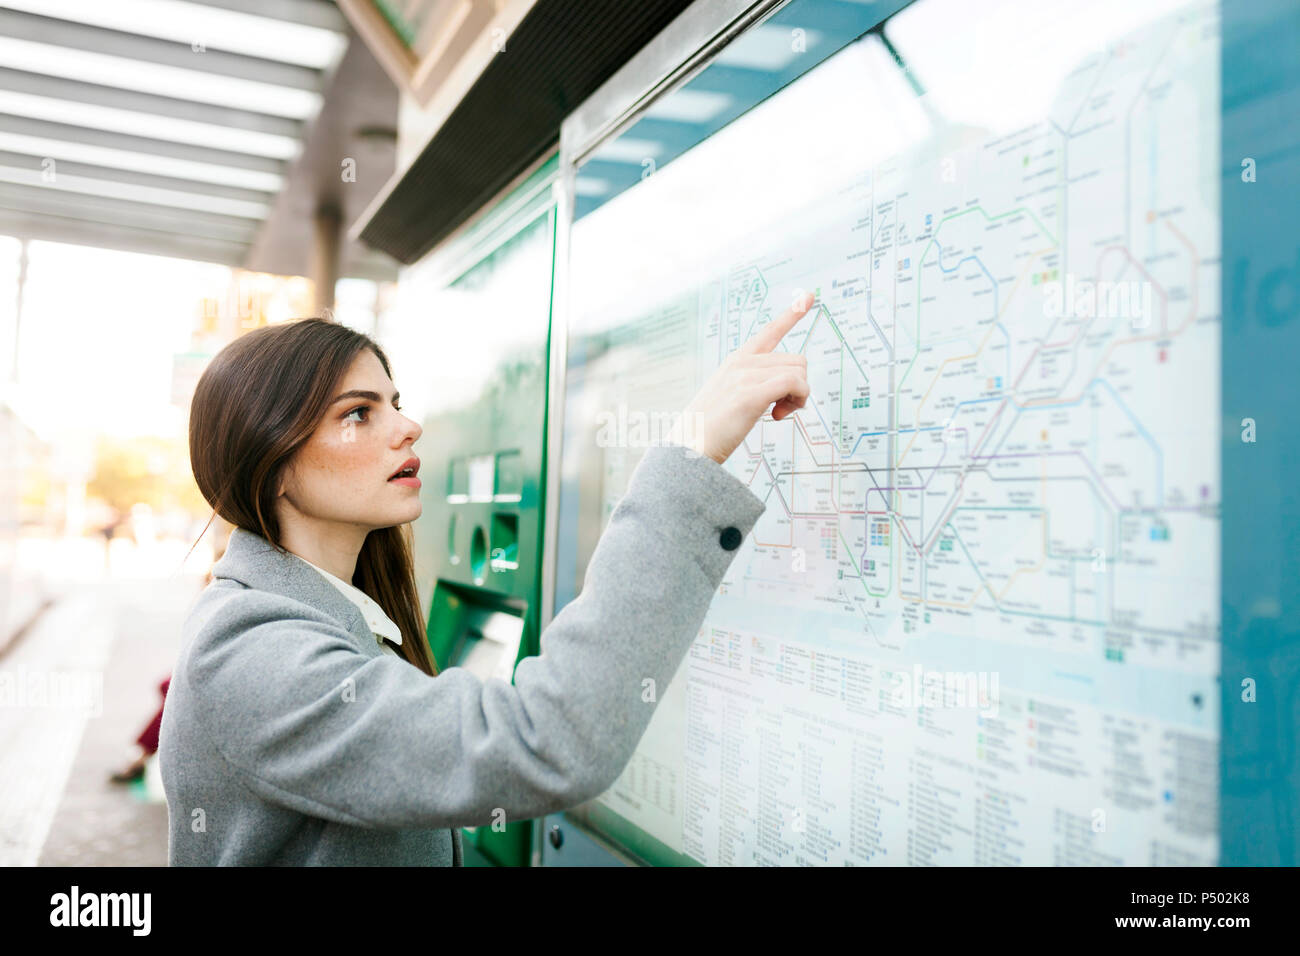 Spain, Barcelona, young woman looking at map at station Stock Photo